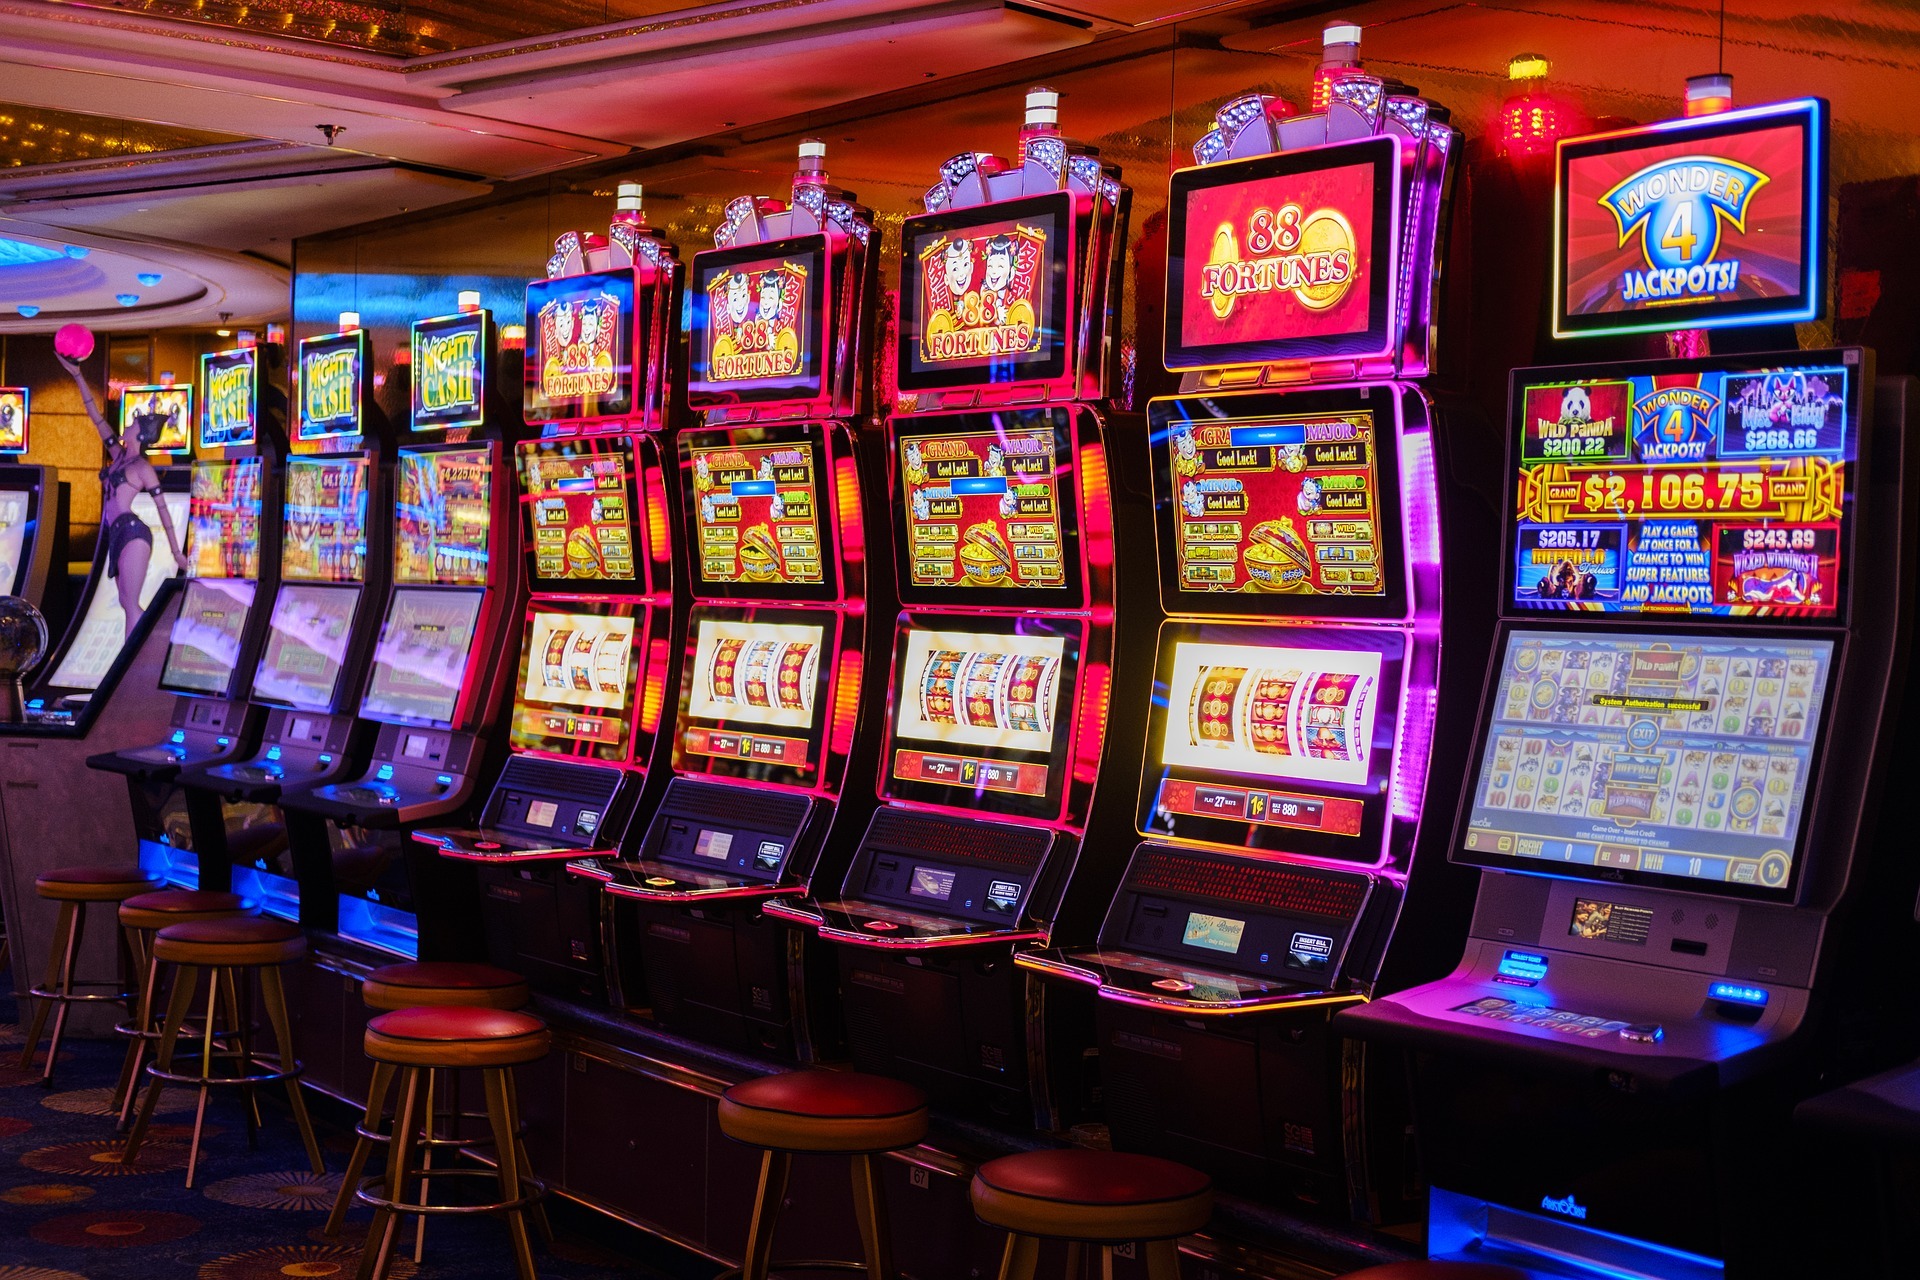 Contactless payment systems in casino gaming